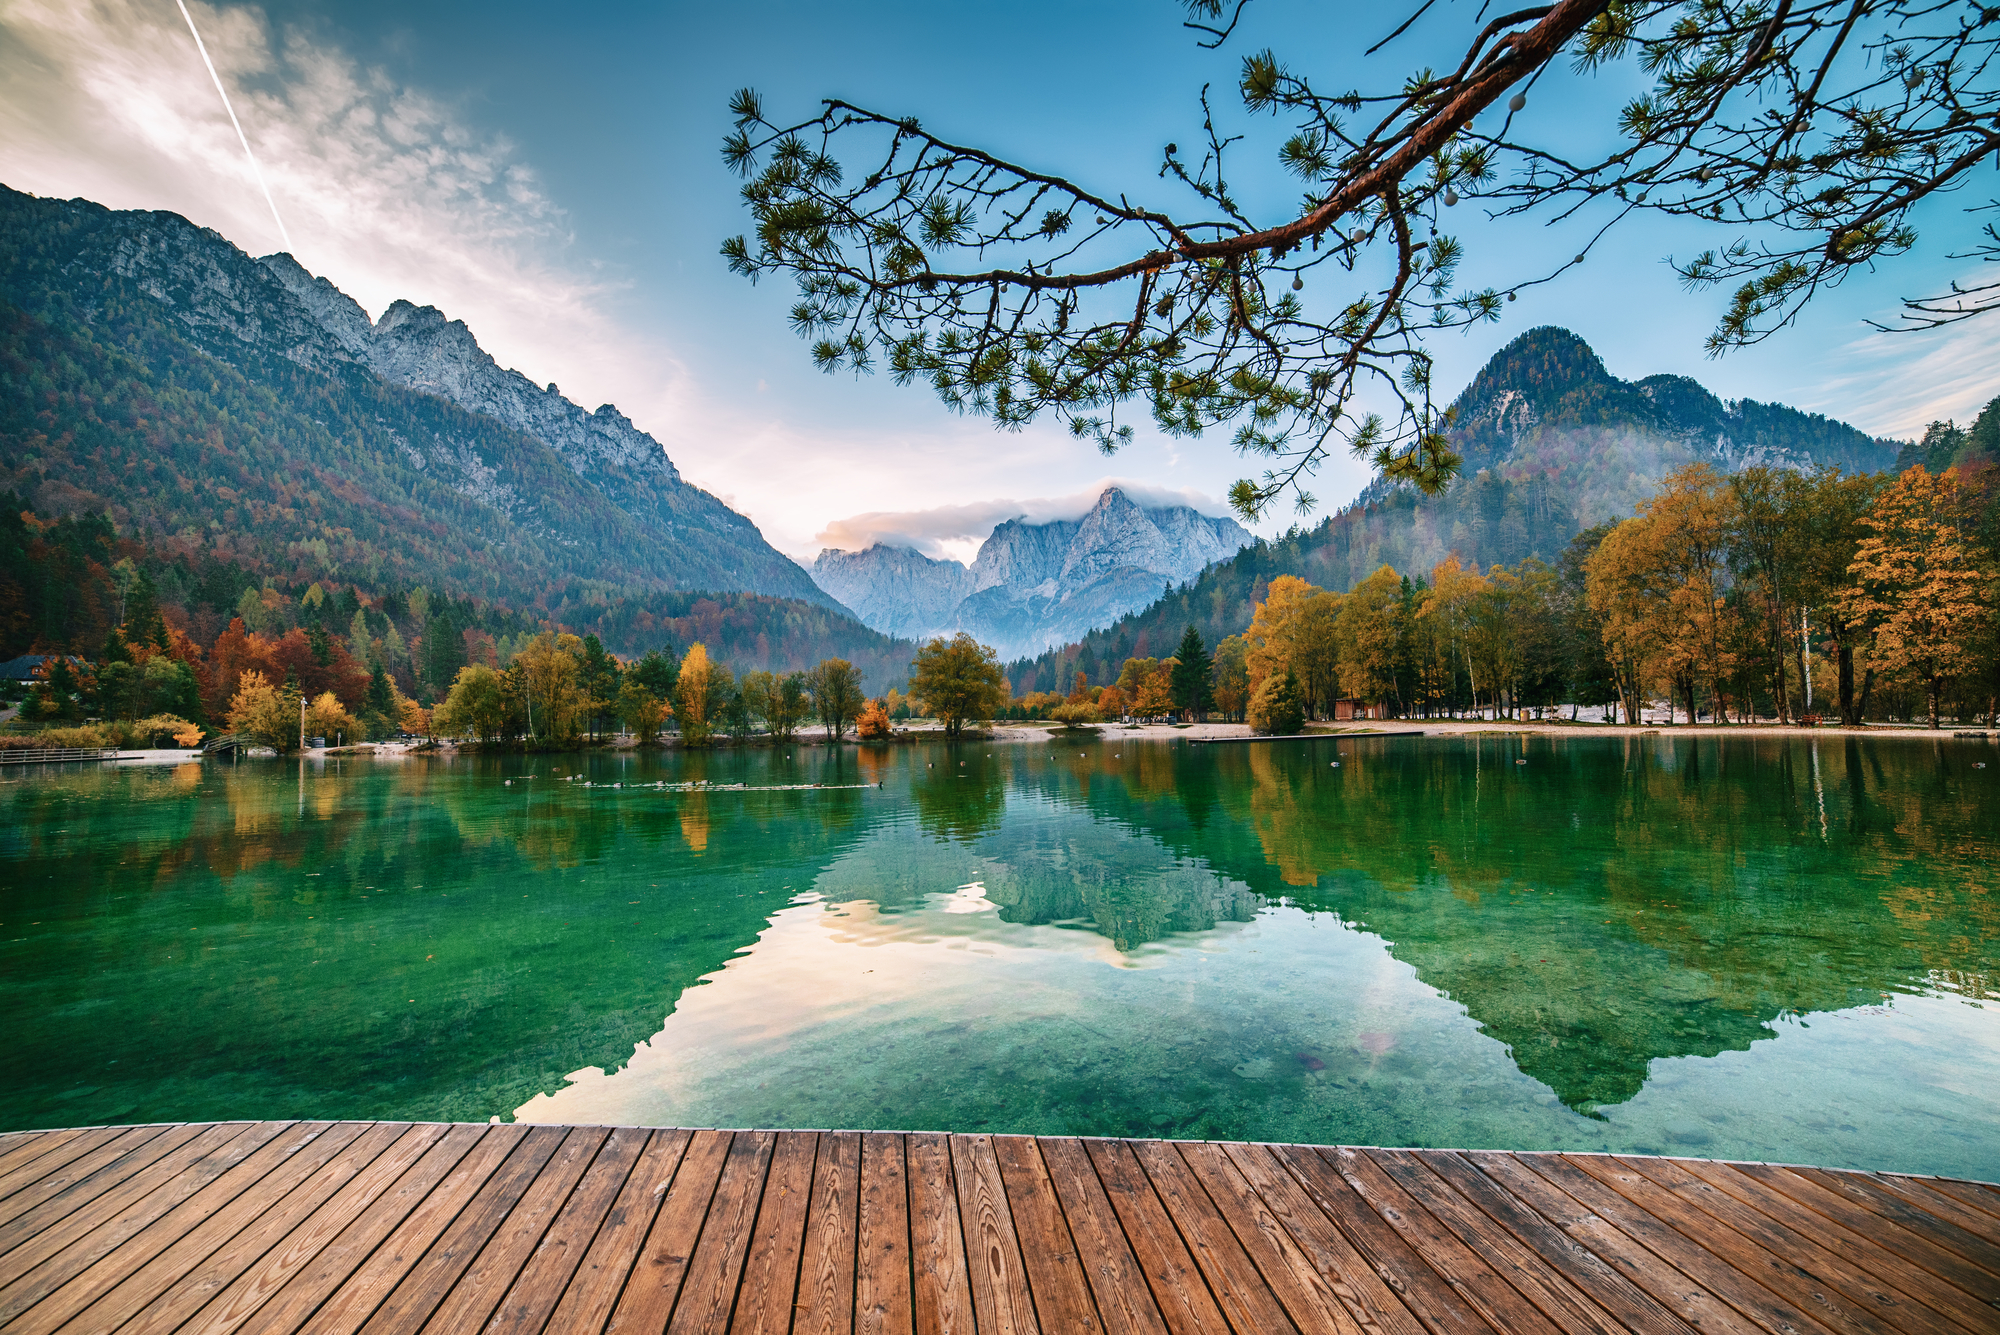 Jasna lake with beautiful reflections of the mountains and wooden pier. Triglav National Park, Slovenia